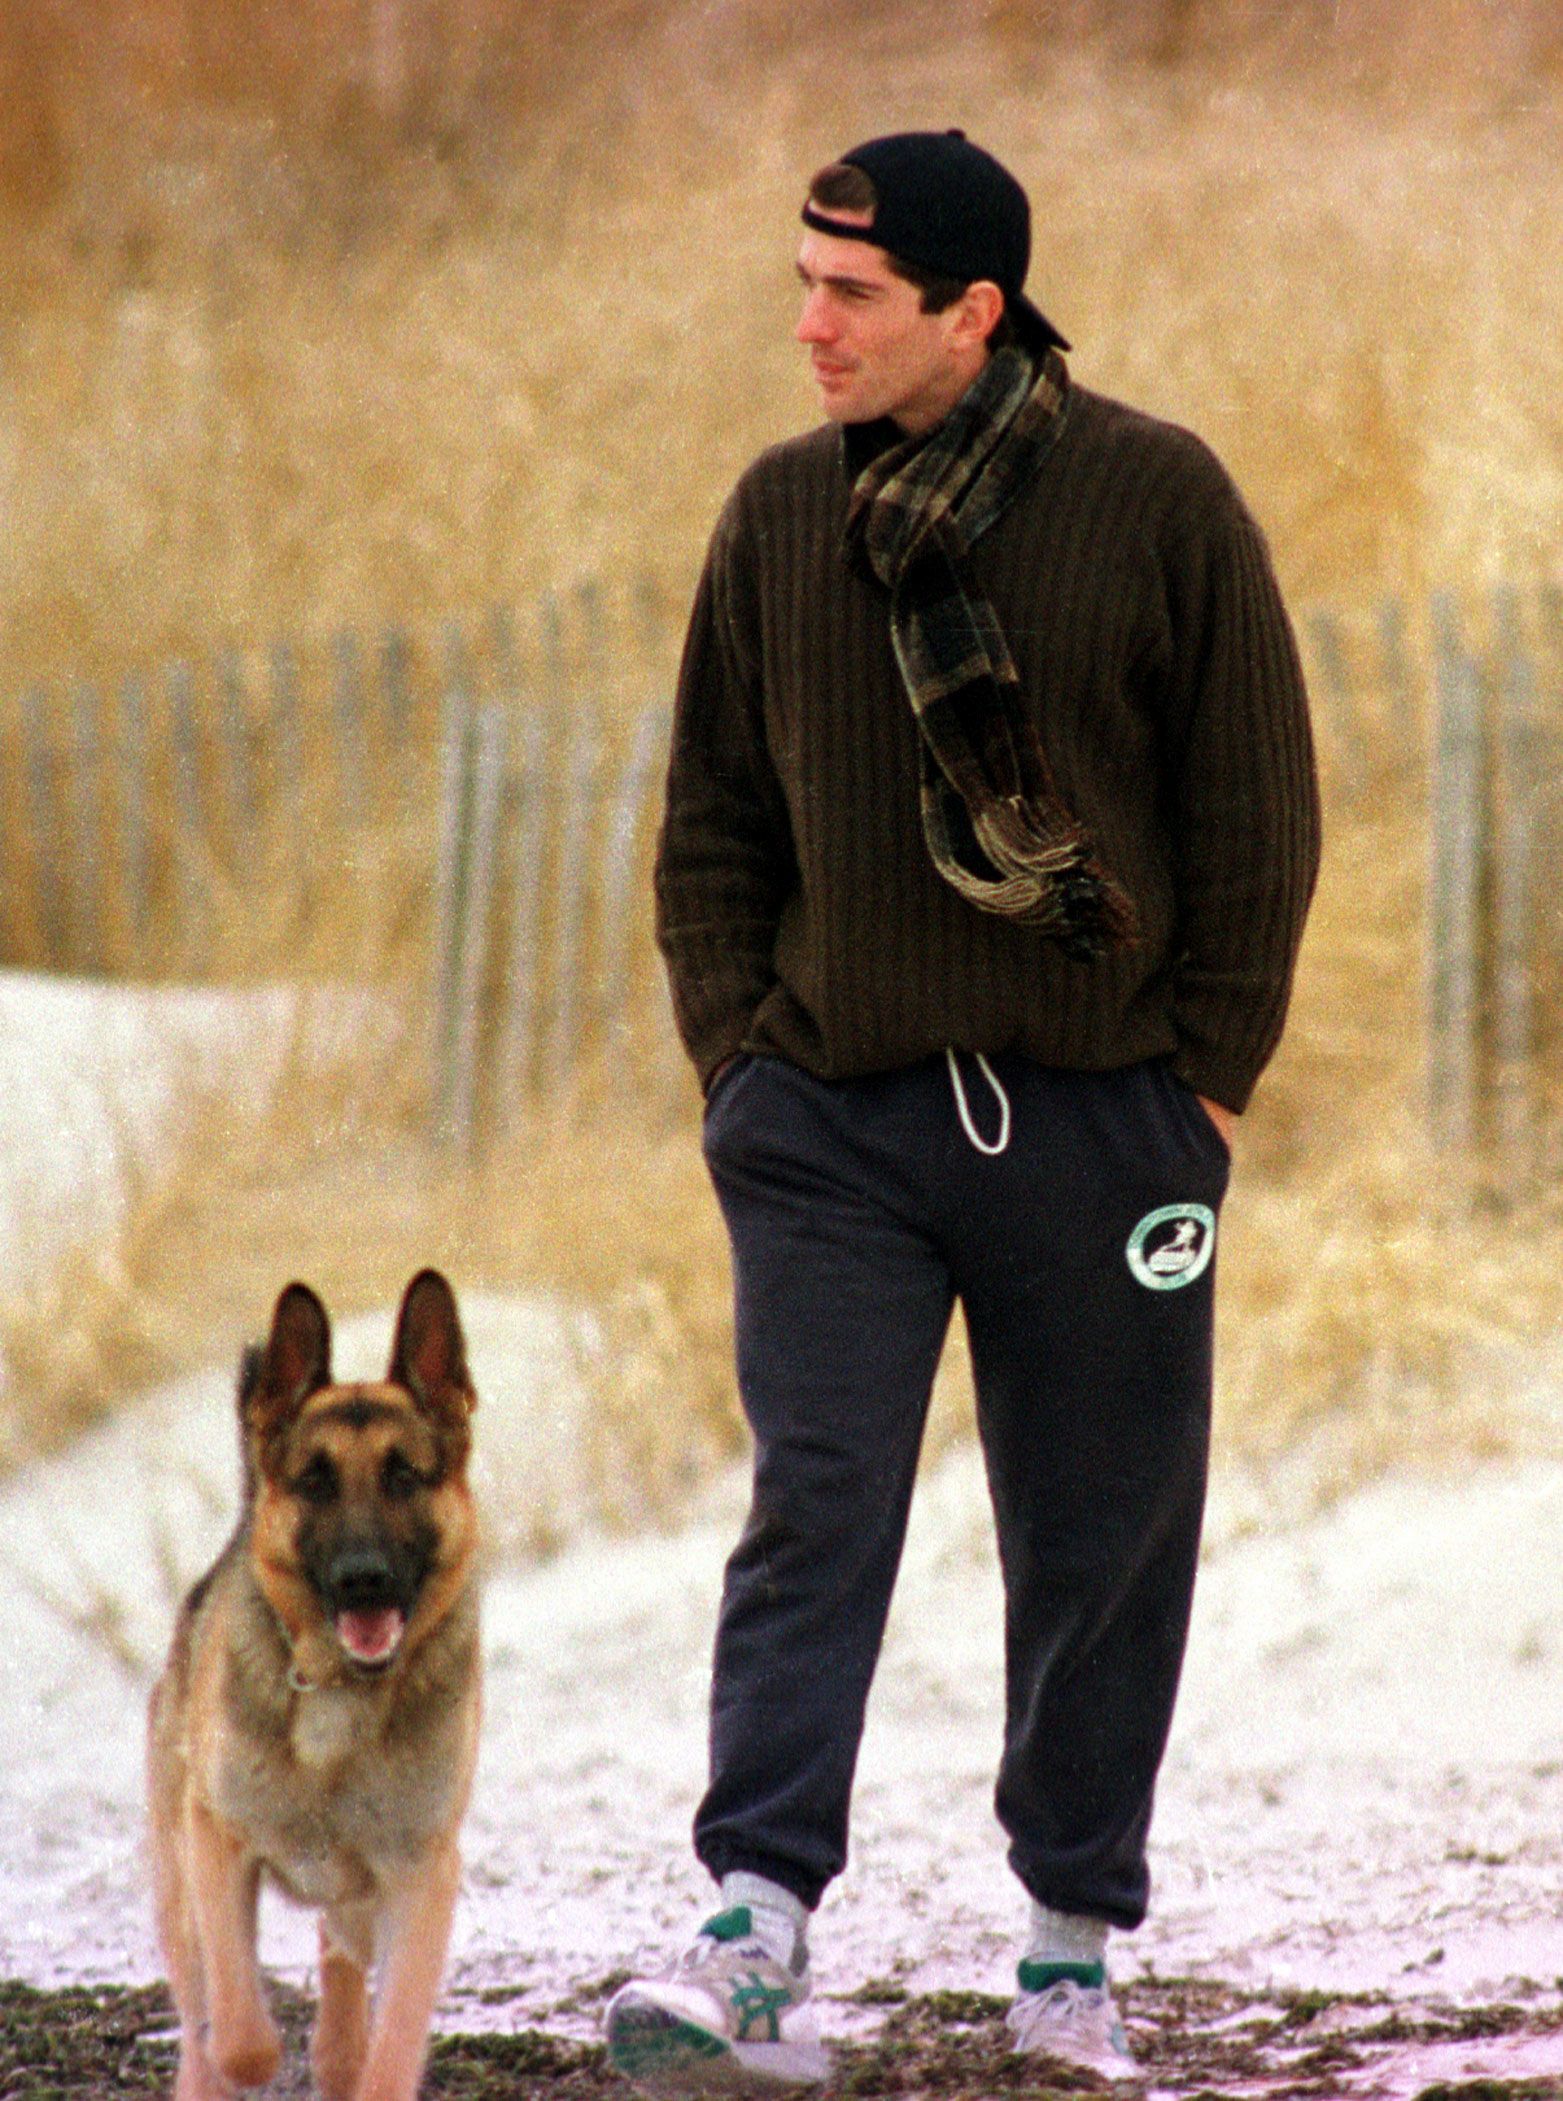 John F. Kennedy Jr. looks out to sea while walking with his dog along the beach on January 24, 1995 | Photo: Getty Images